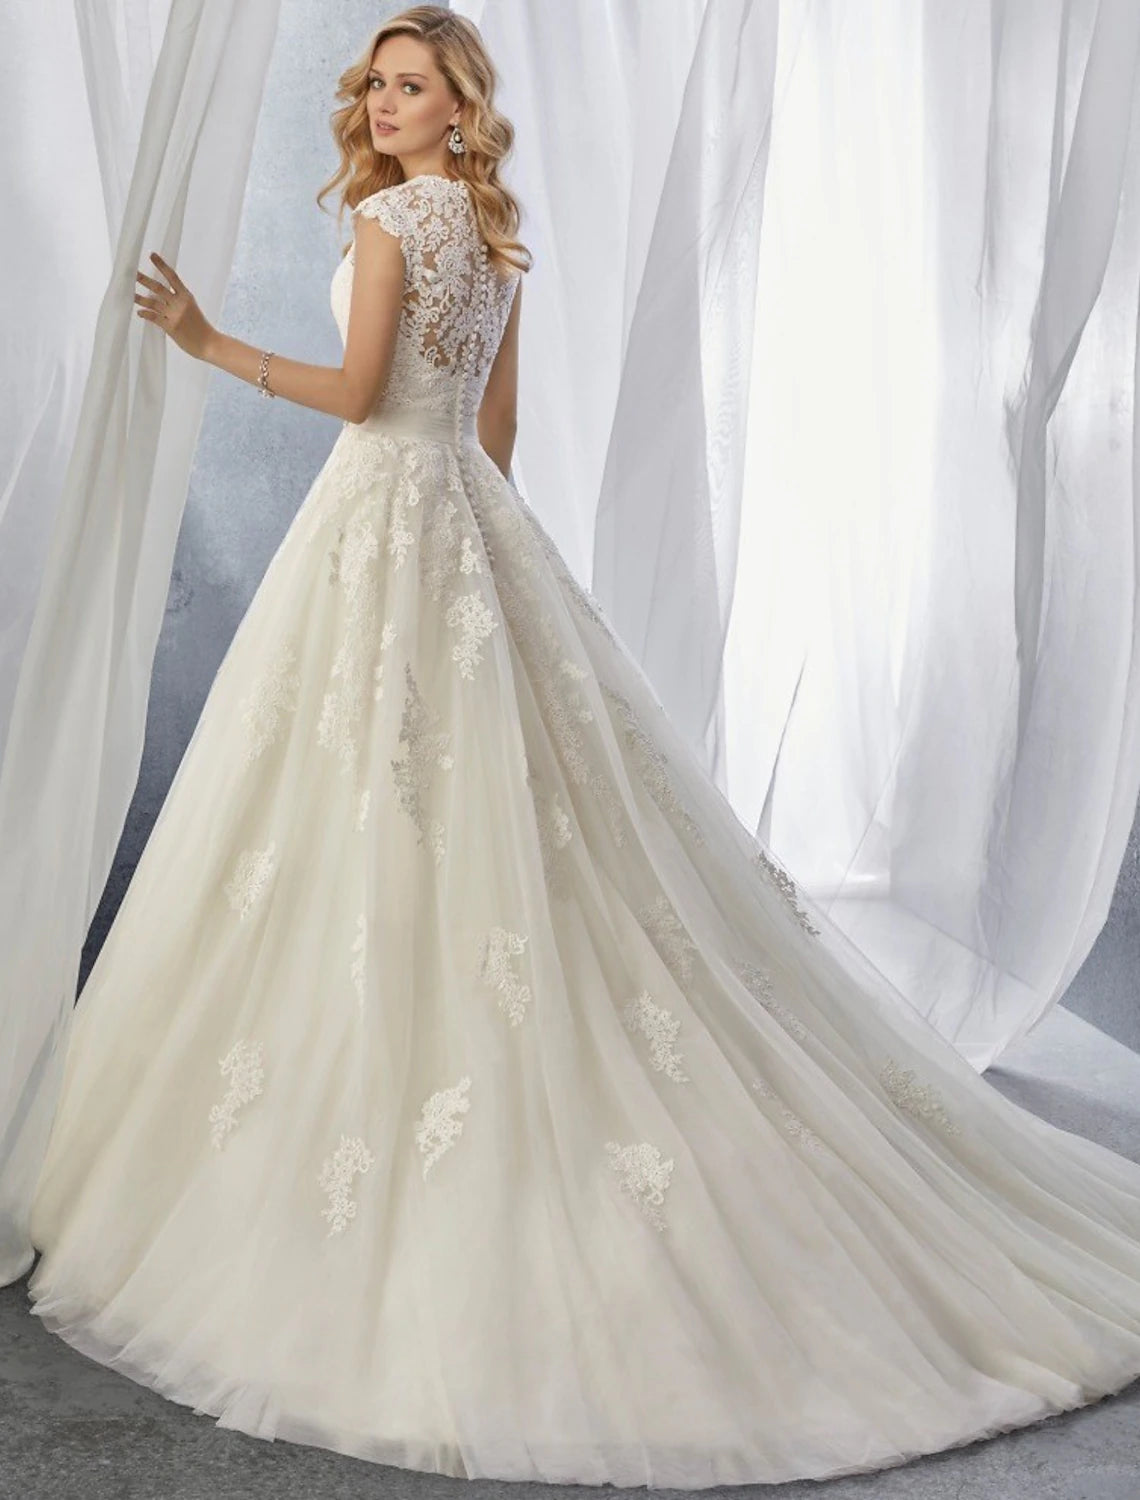 Engagement Formal Wedding Dresses Ball Gown Sweetheart Cap Sleeve Court Train Lace Bridal Gowns With Appliques